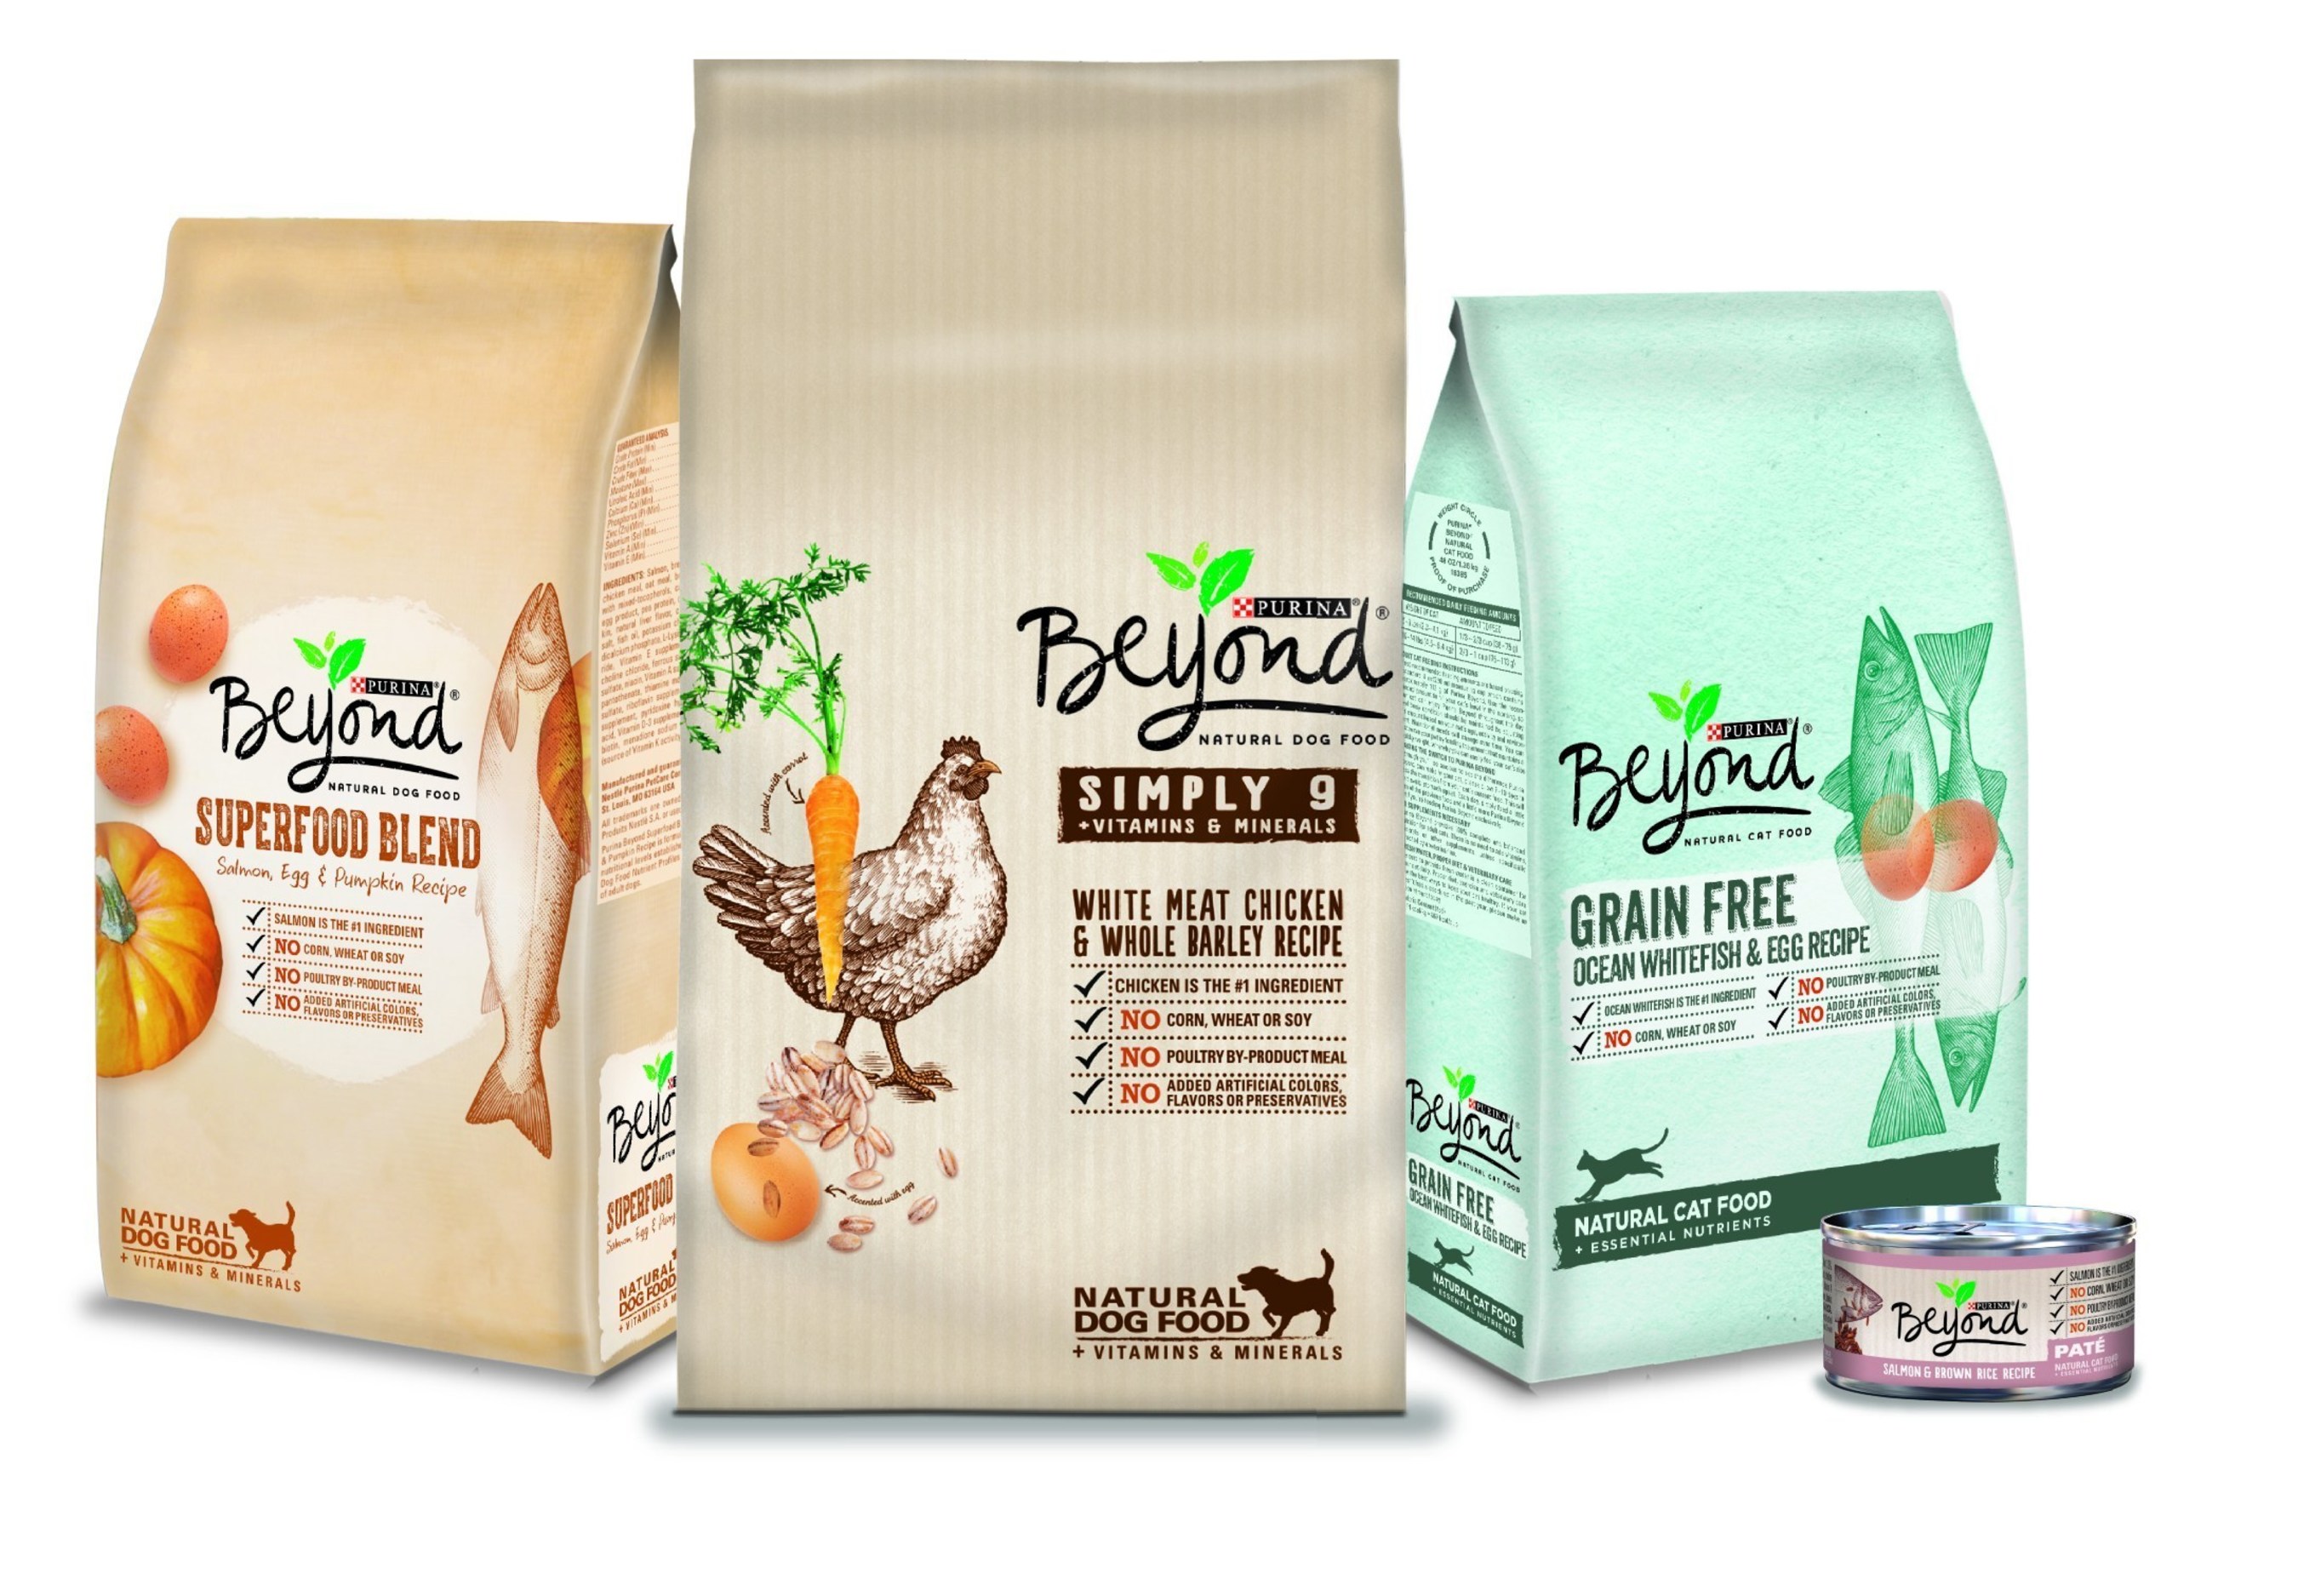 Purina(R) brings new natural dog and cat food options to the pet food aisle with Purina(R) Beyond.(R) For more information, visit www.BeyondPetFood.com. (Source: Purina Beyond) (PRNewsFoto/Nestle Purina PetCare Company)